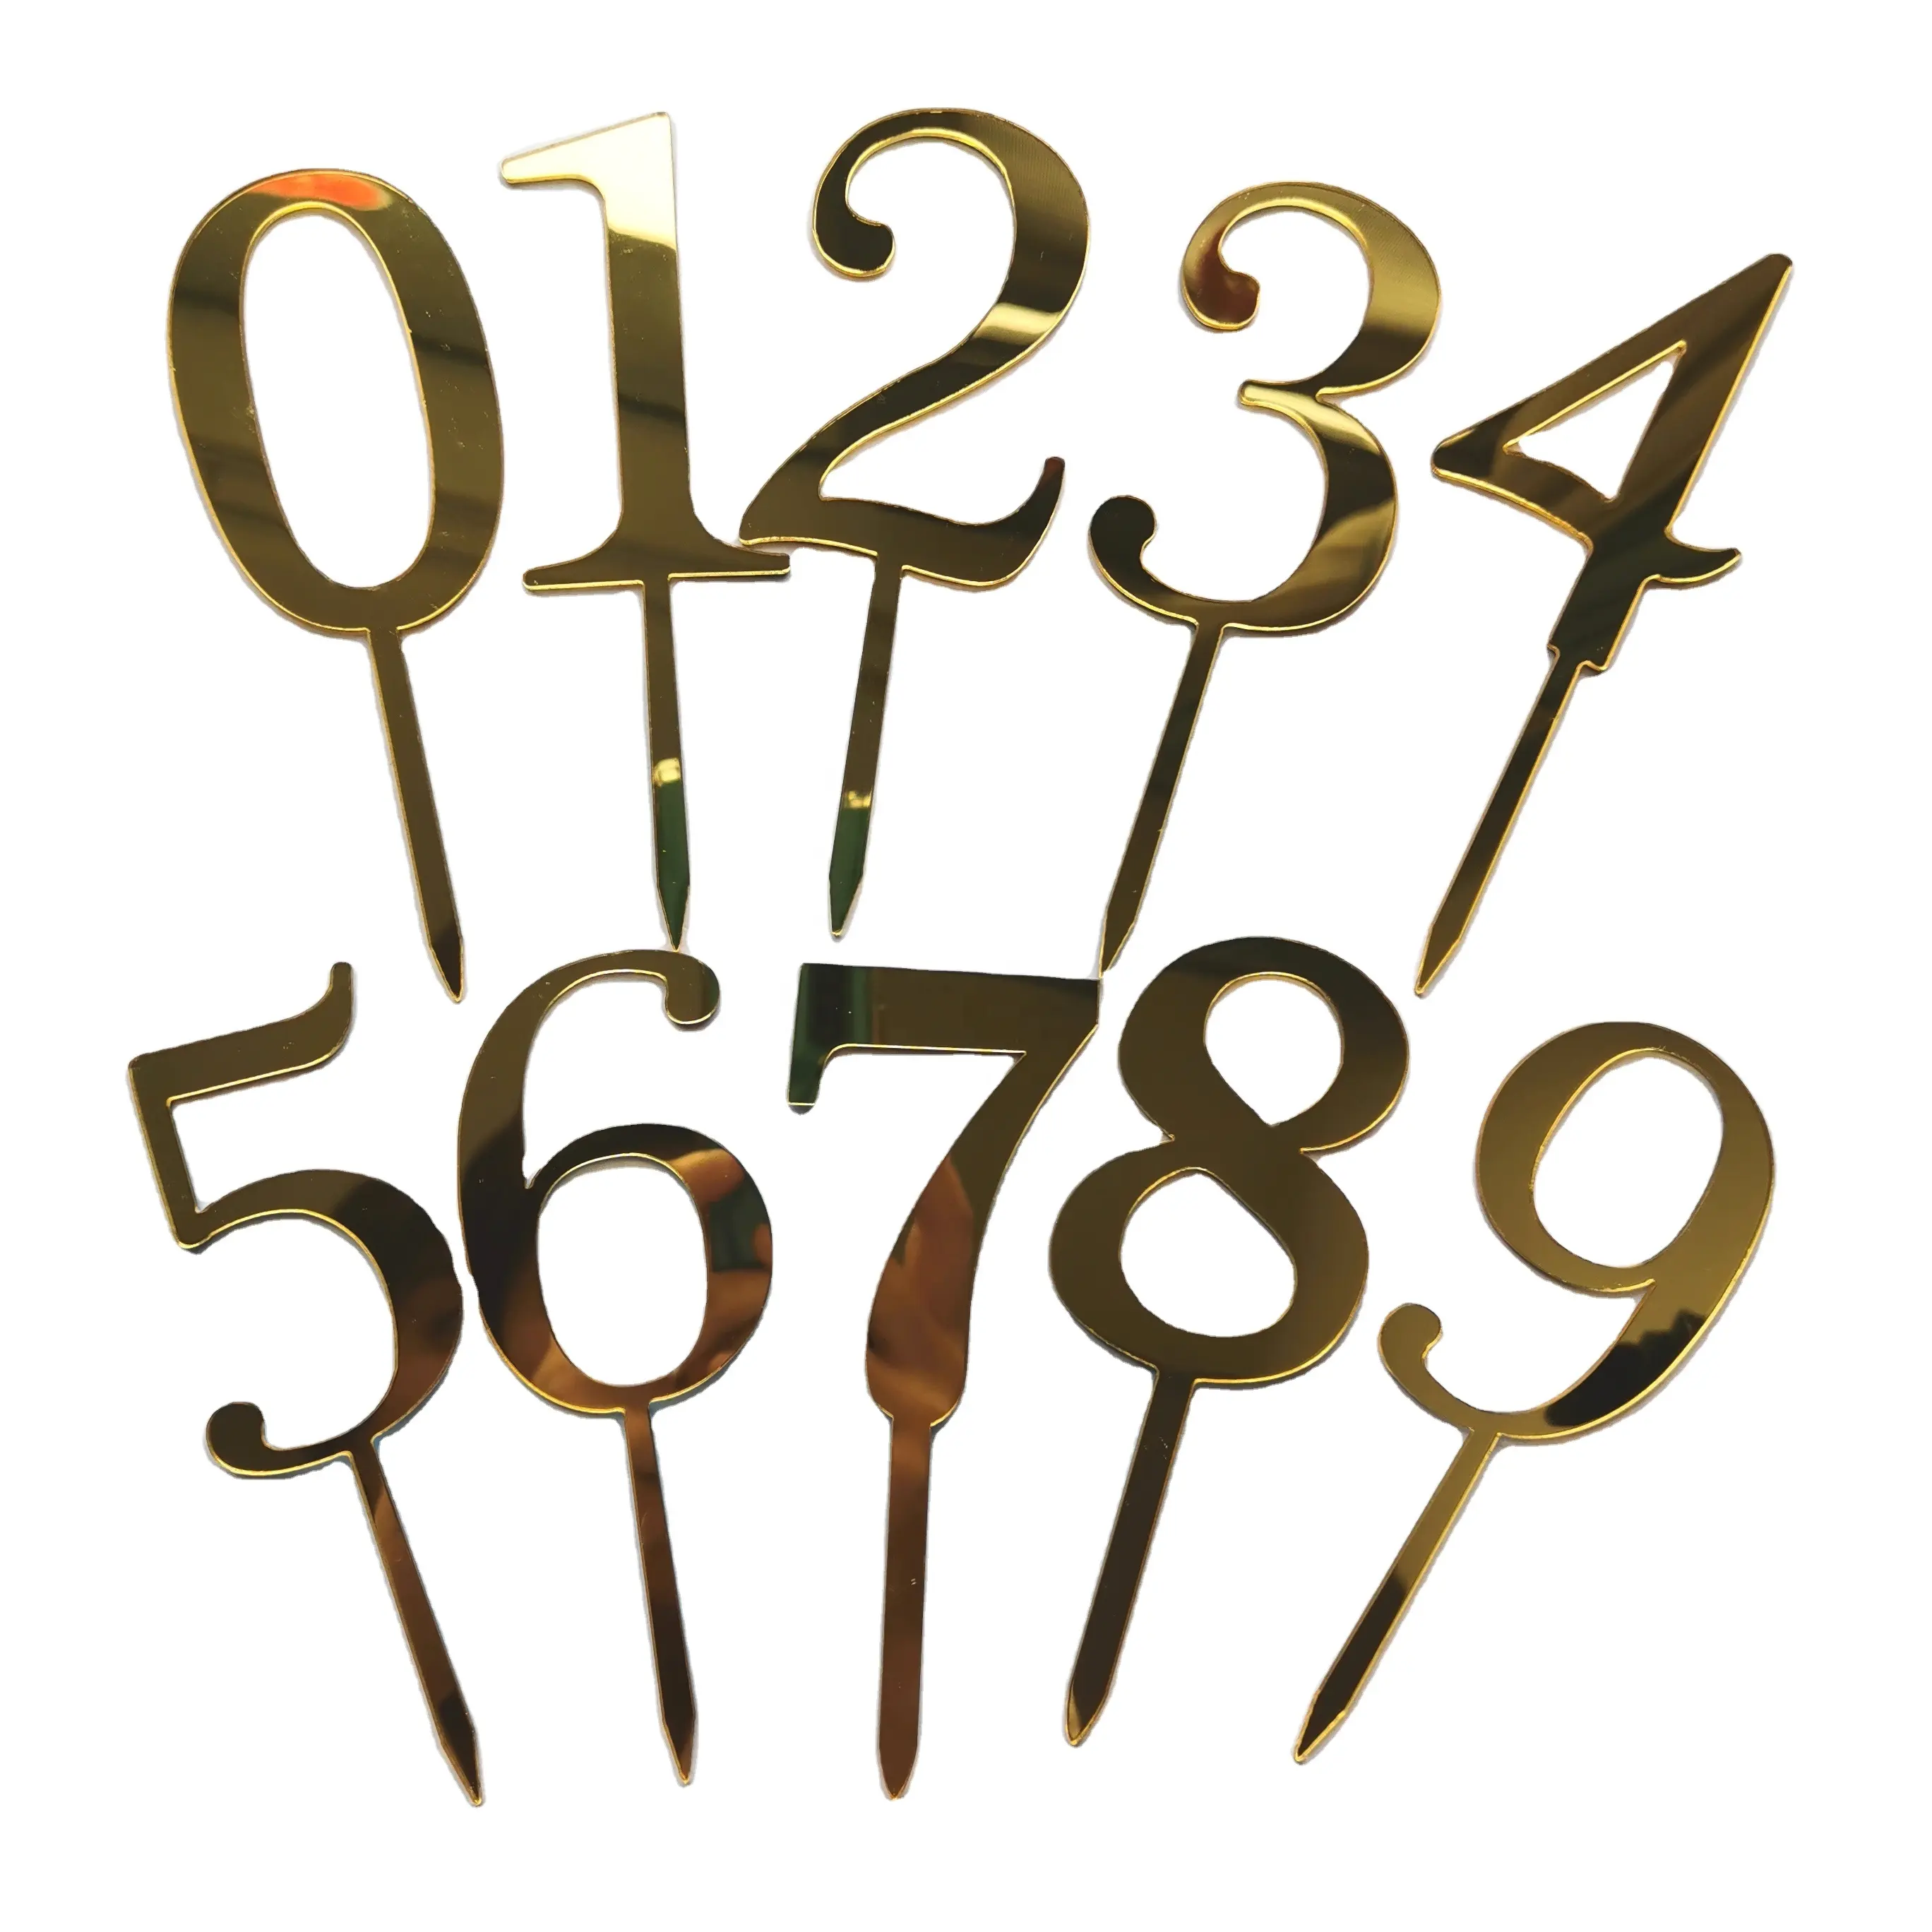 Hot sale party supplies acrylic cake topper numbers